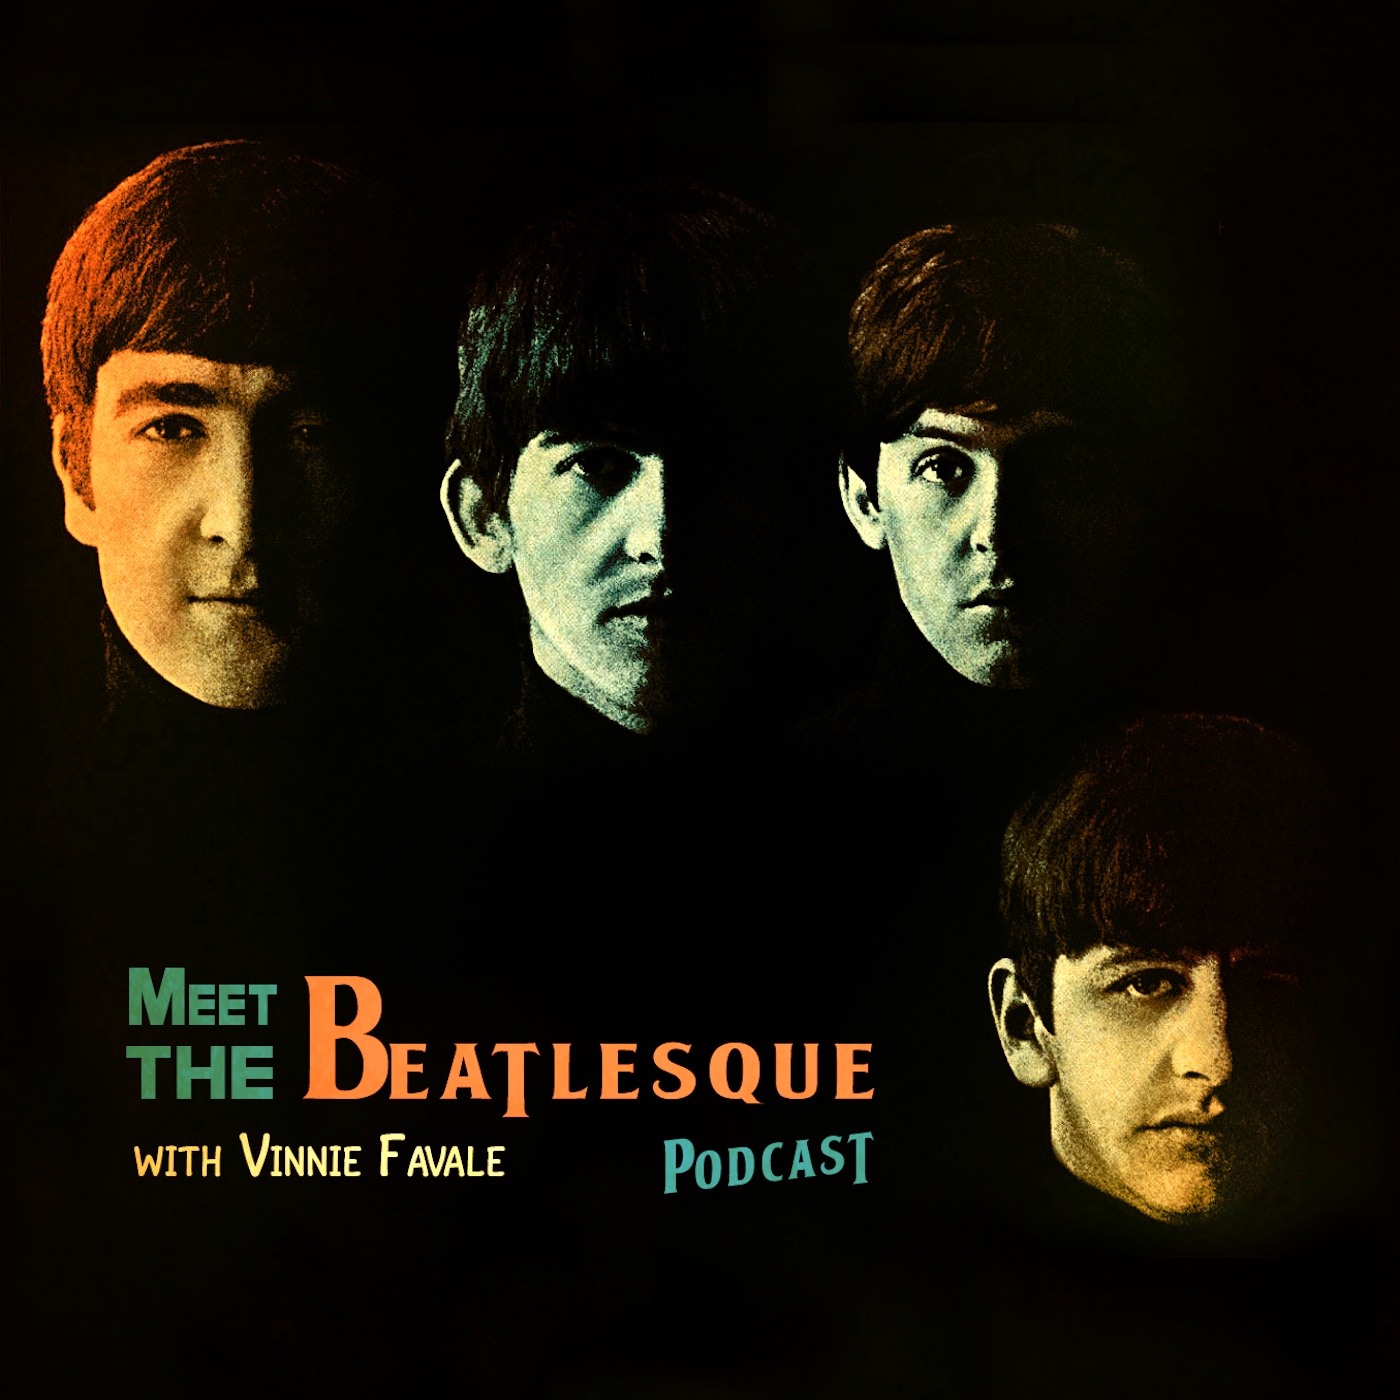 Meet The Beatlesque with Vinnie Favale - Show #3